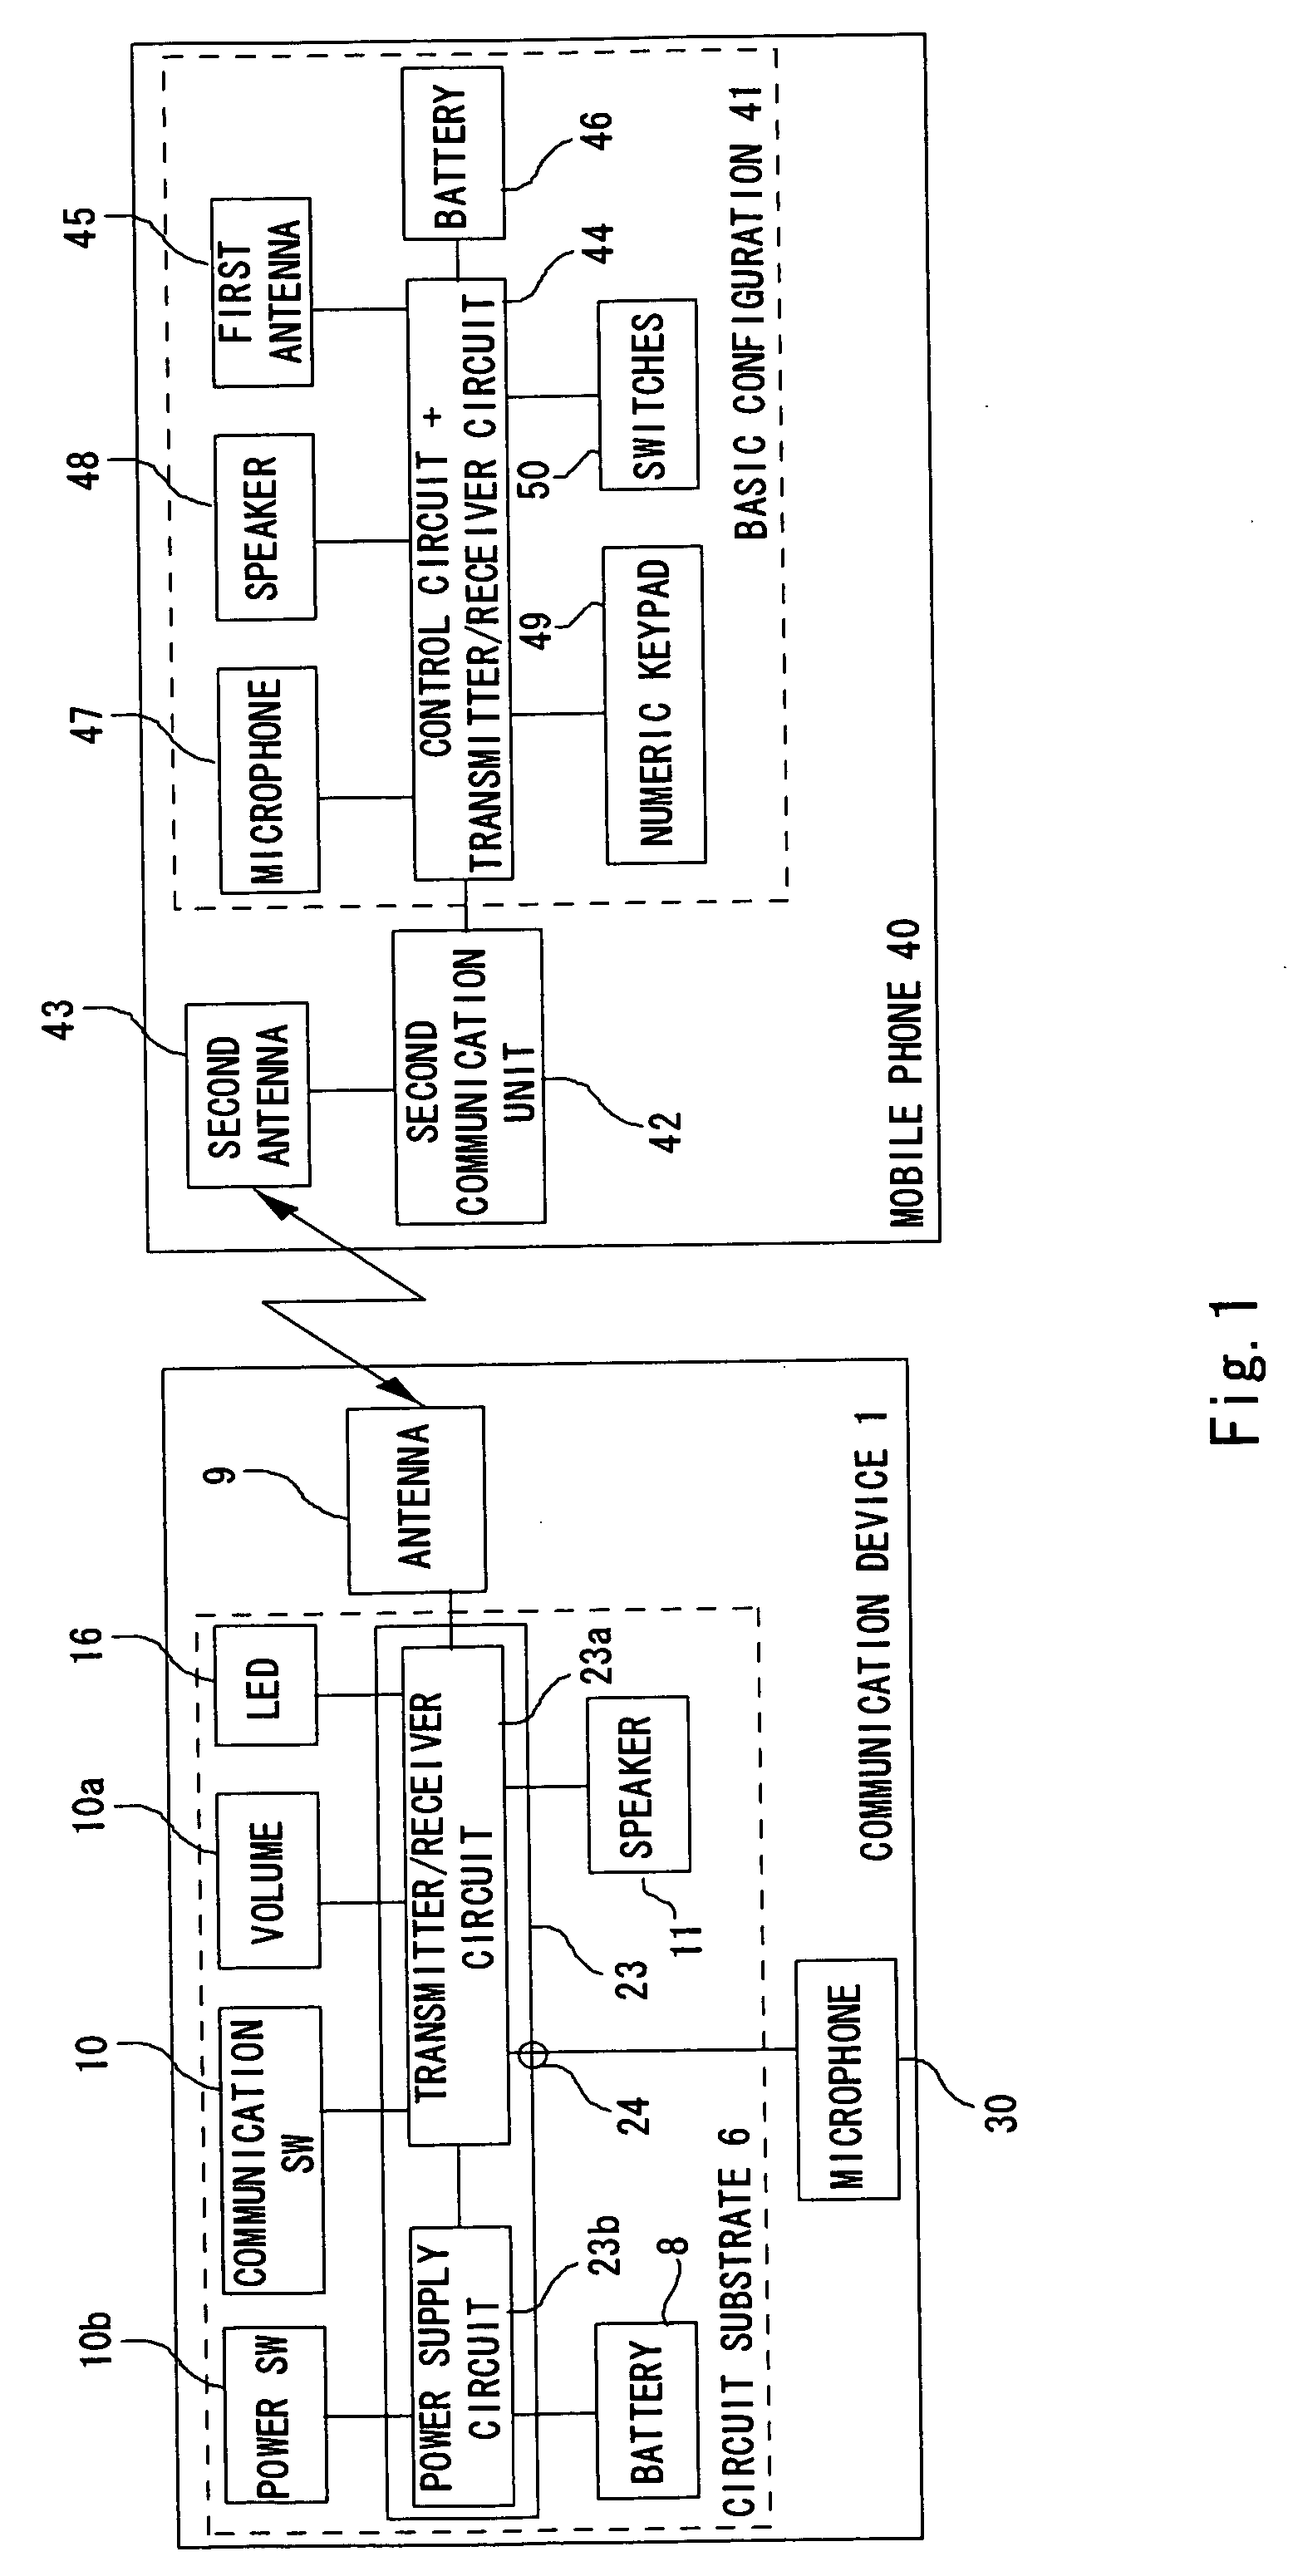 Ear fixed type conversation device